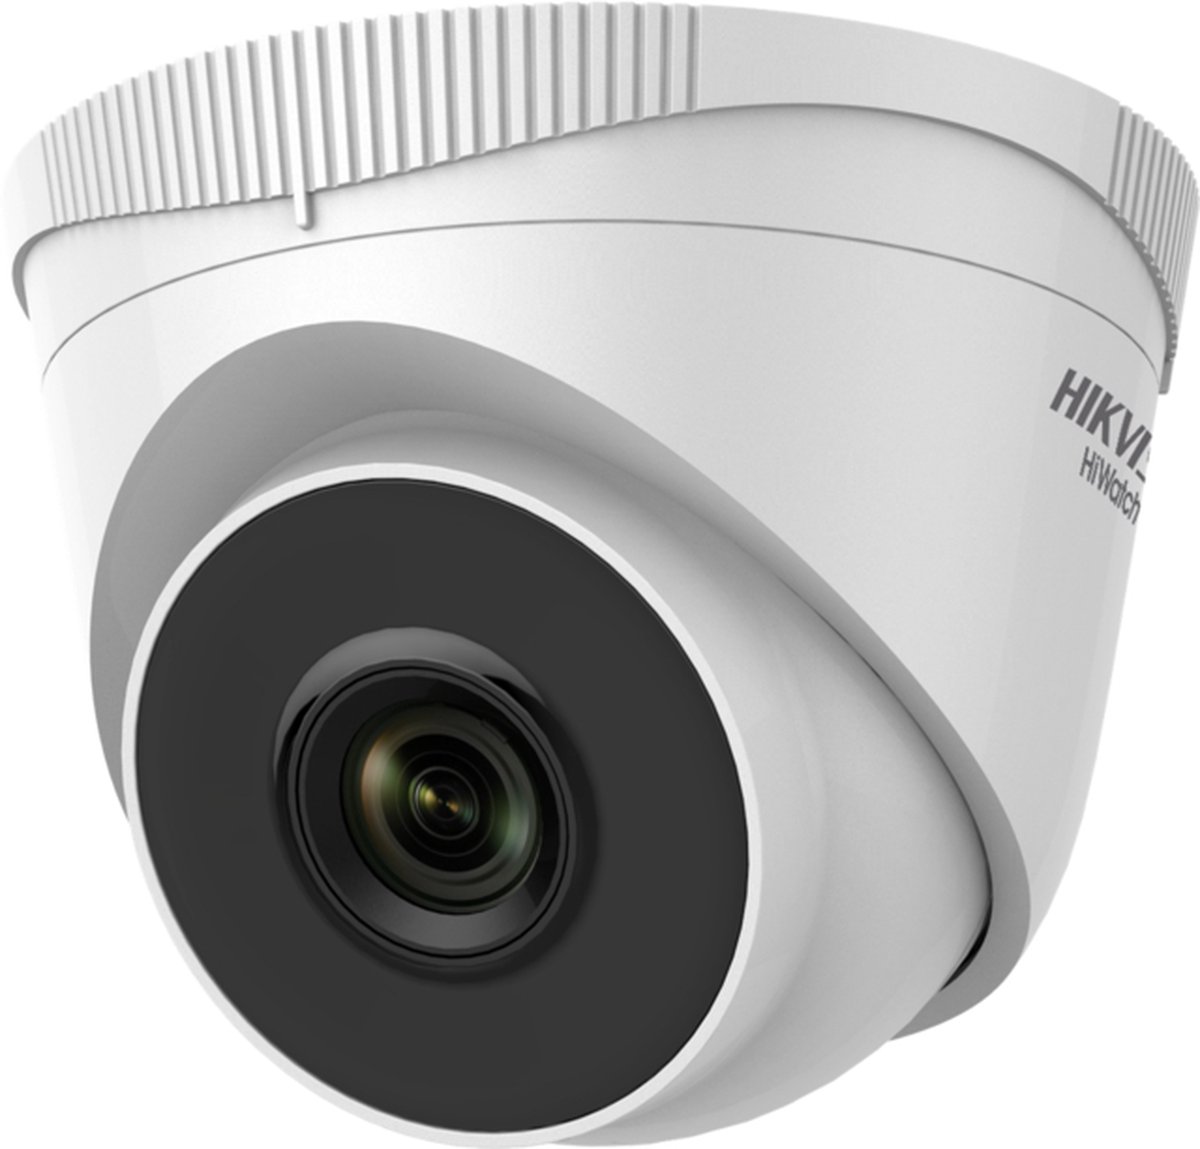 HIKVISION HIWATCH WI-T240H 4MP TURRET OUTDOOR 2.8MM Camera